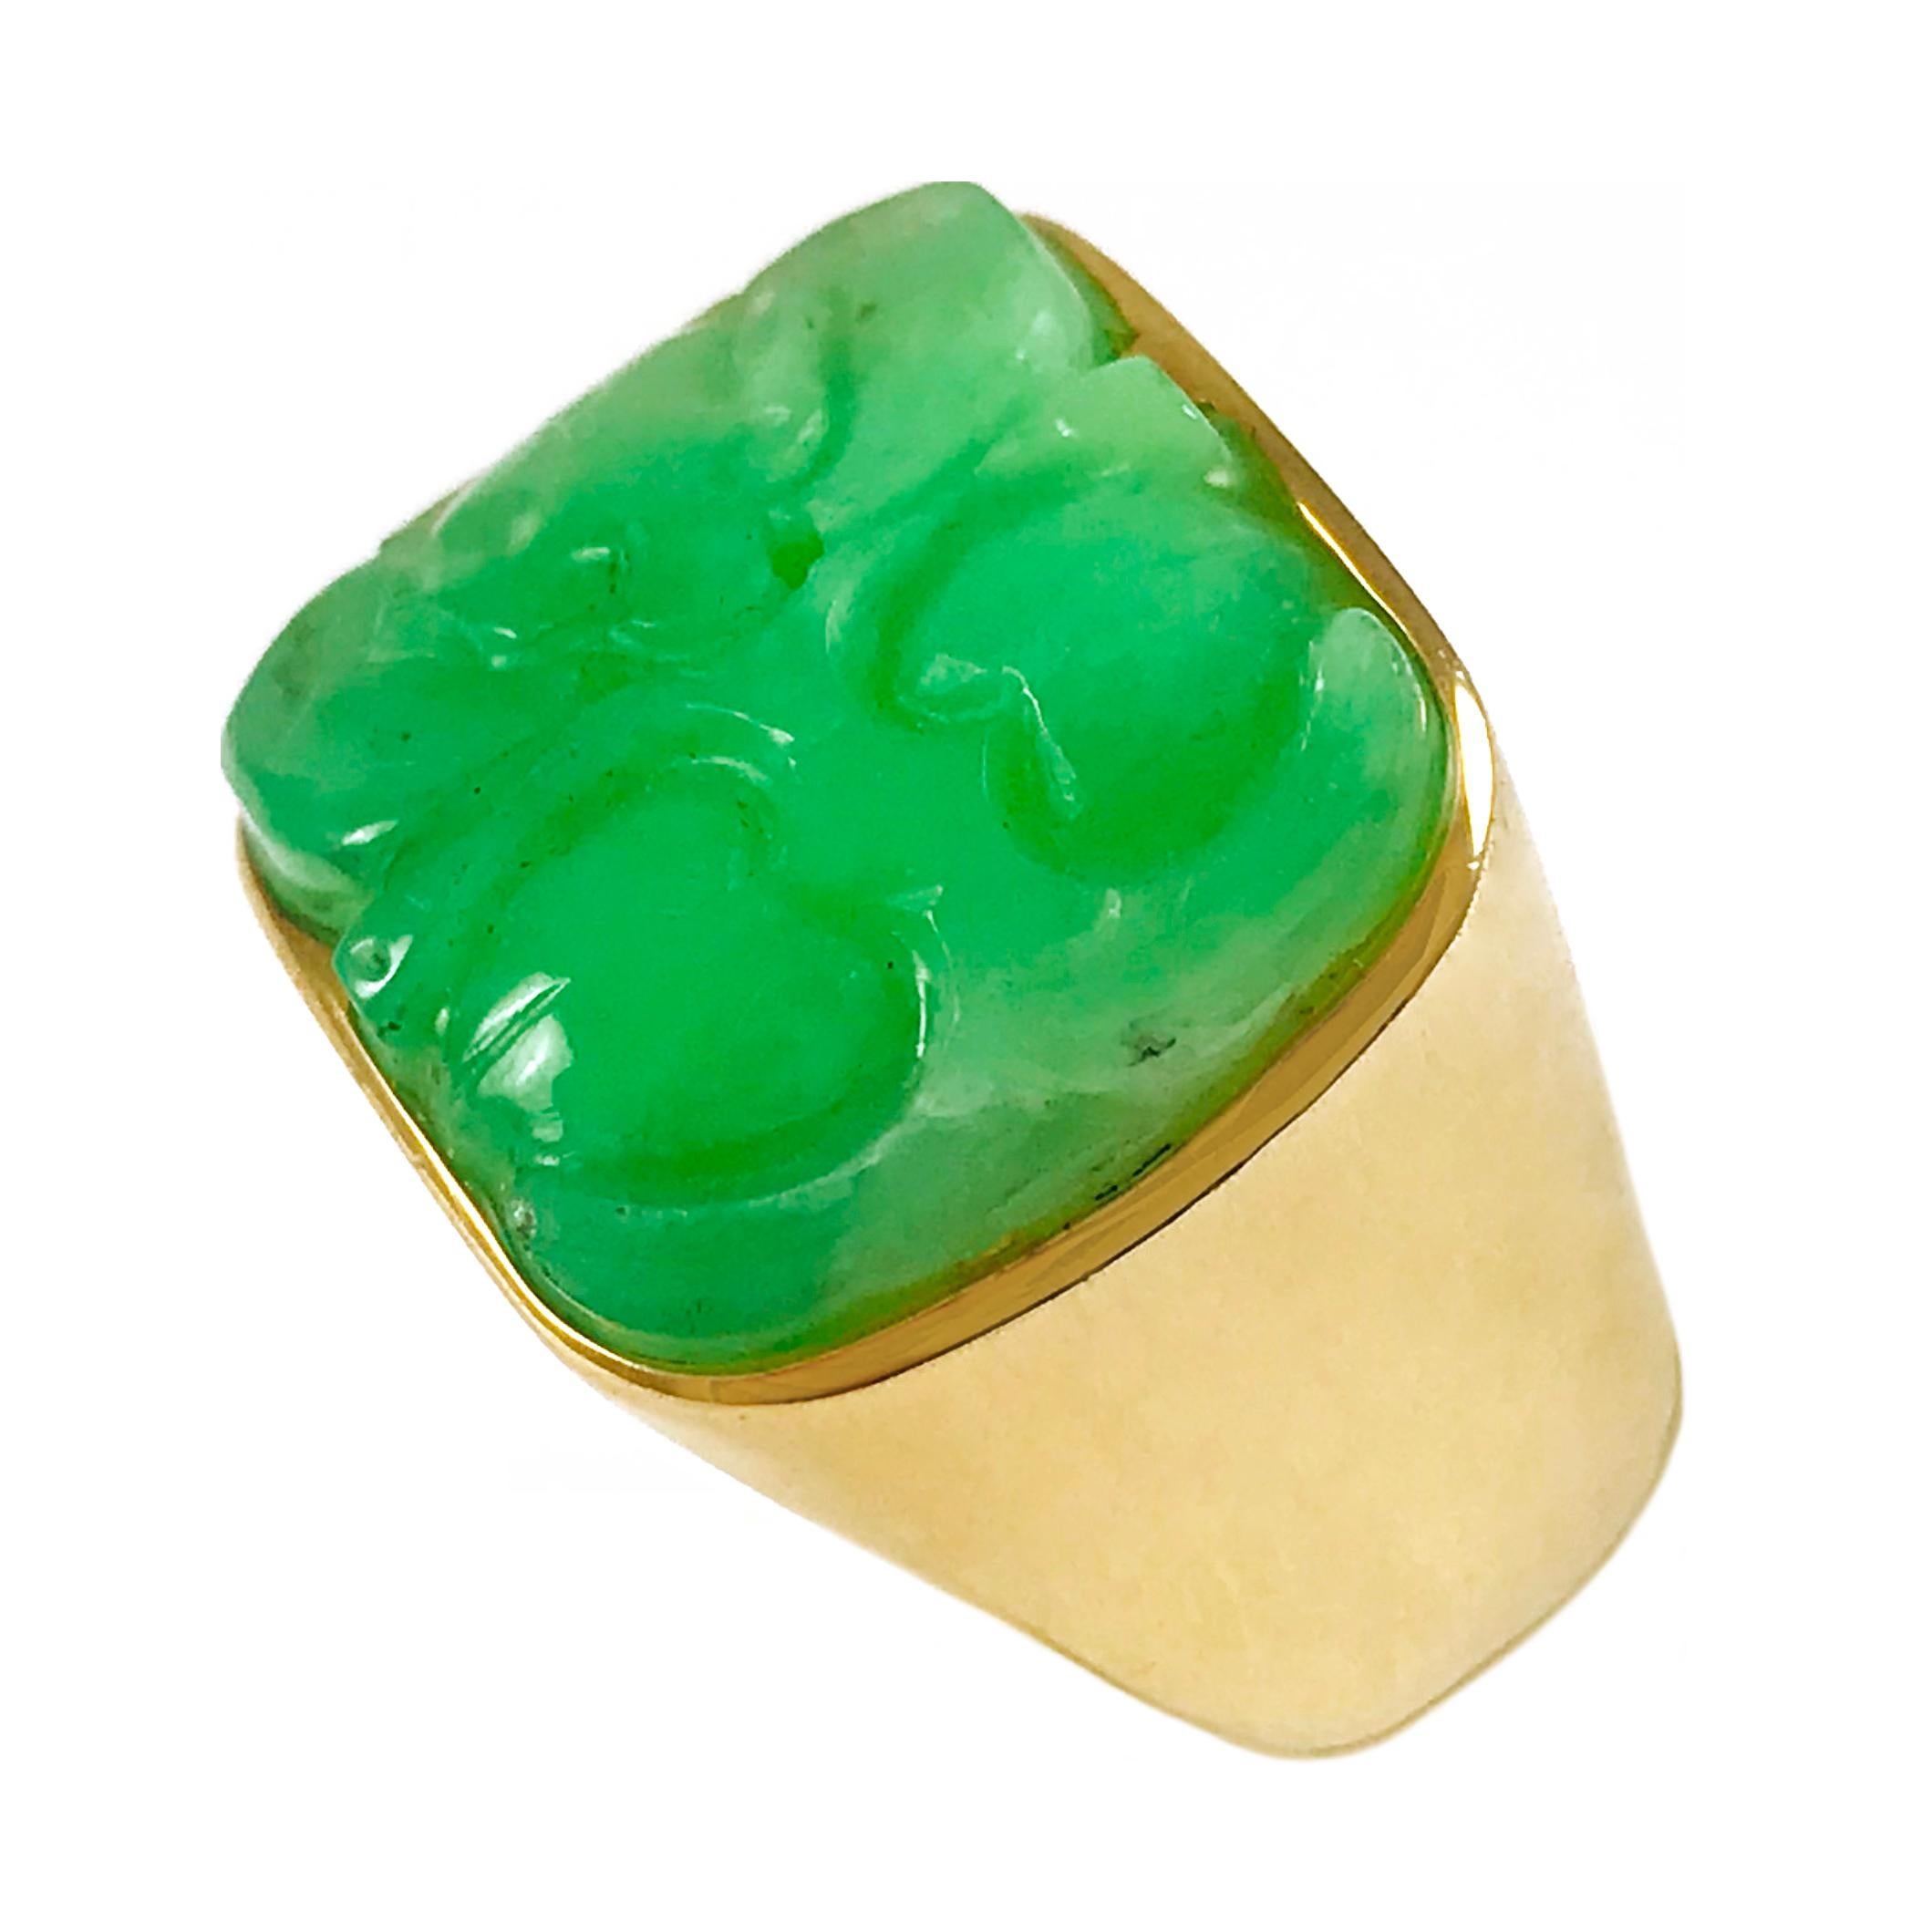 Carved Green Jade 14 Karat Gold Wide Band Ring. The beautiful bright green jade is bezel set among the shimmering gold of this wide band ring. Ring is a size 7 and weighs 13.3 grams.